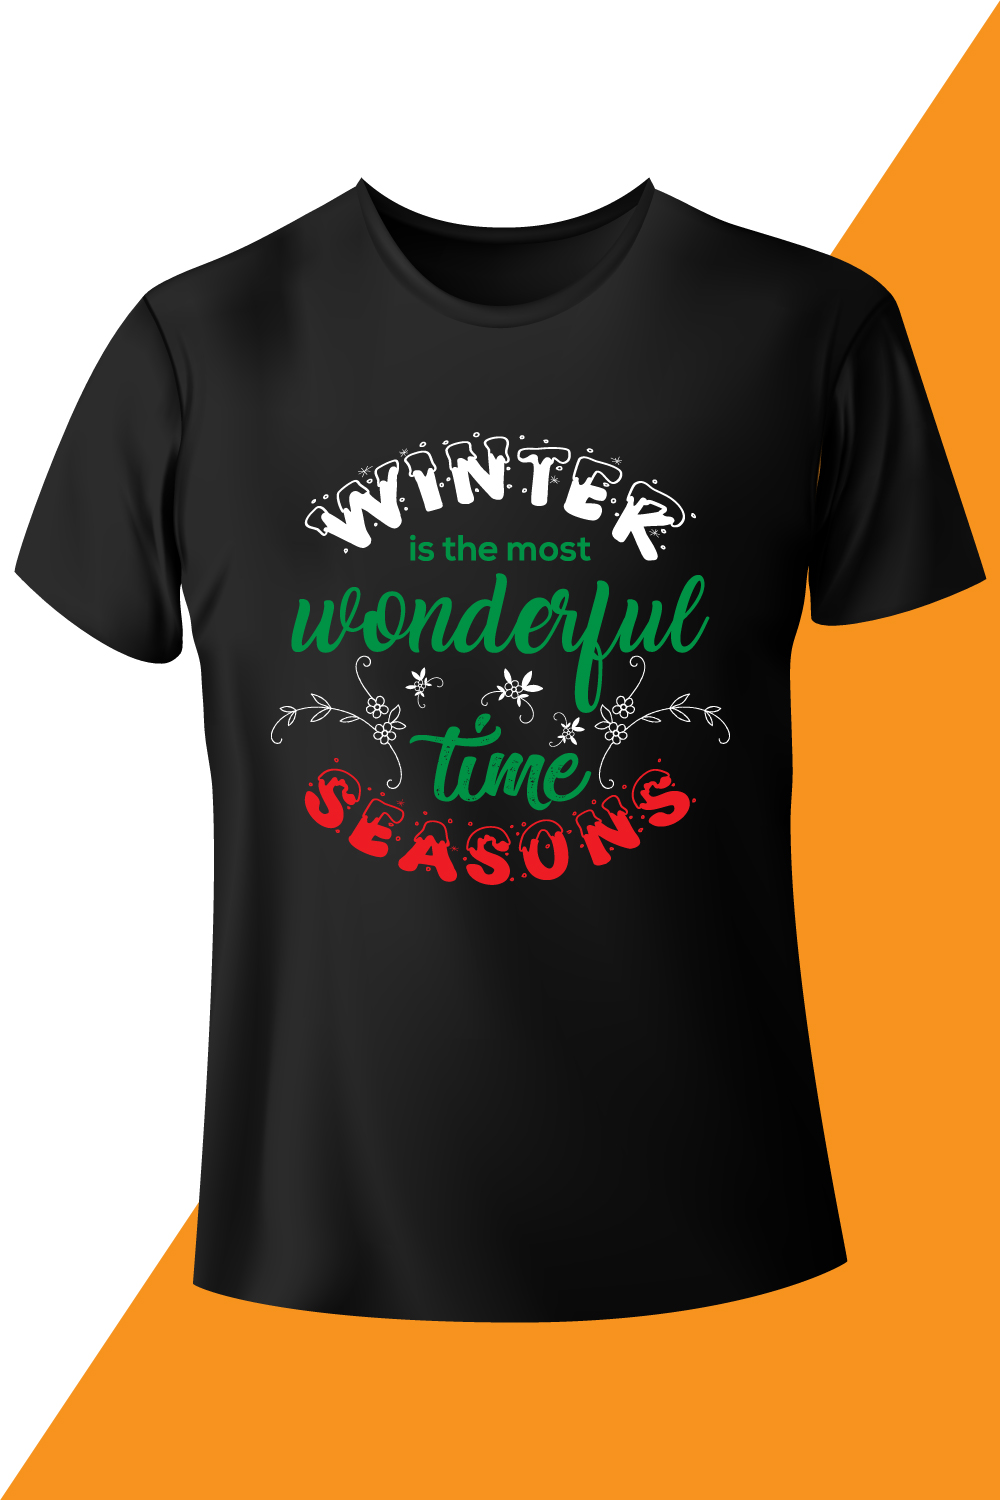 Image of a black t-shirt with the enchanting inscription winter is the most wonderful time season.